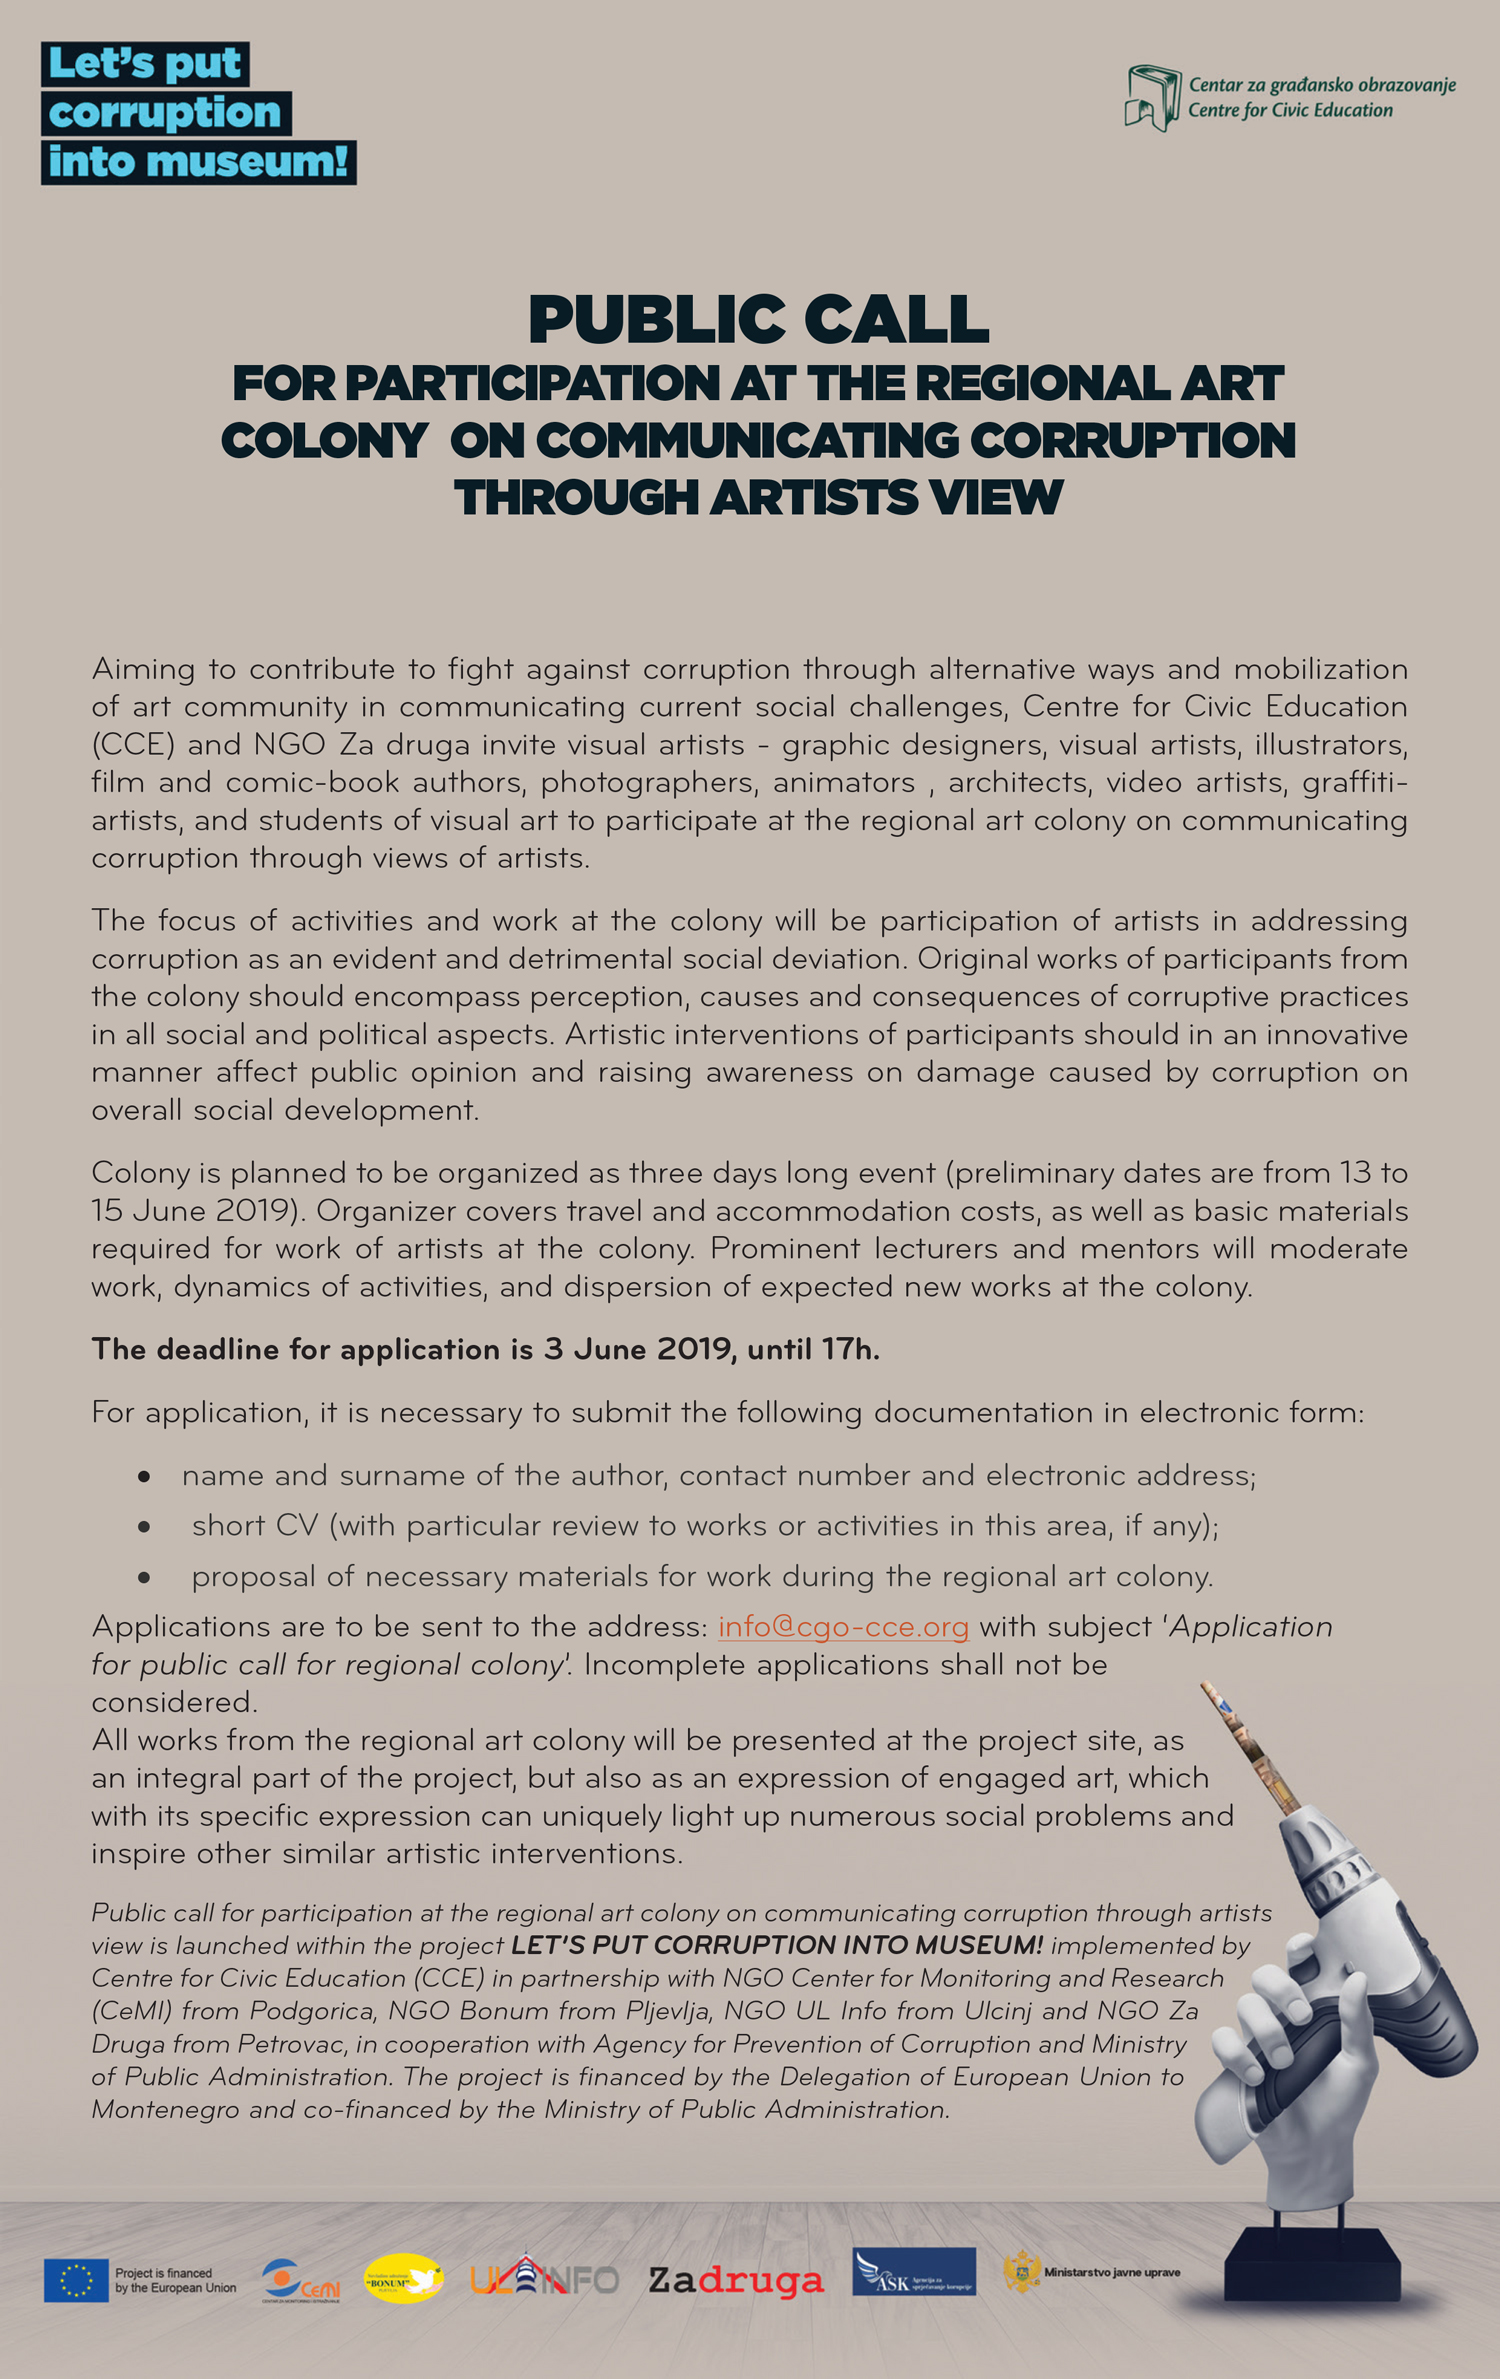 Public call for participation at the regional art colony on communicating corruption through artists view